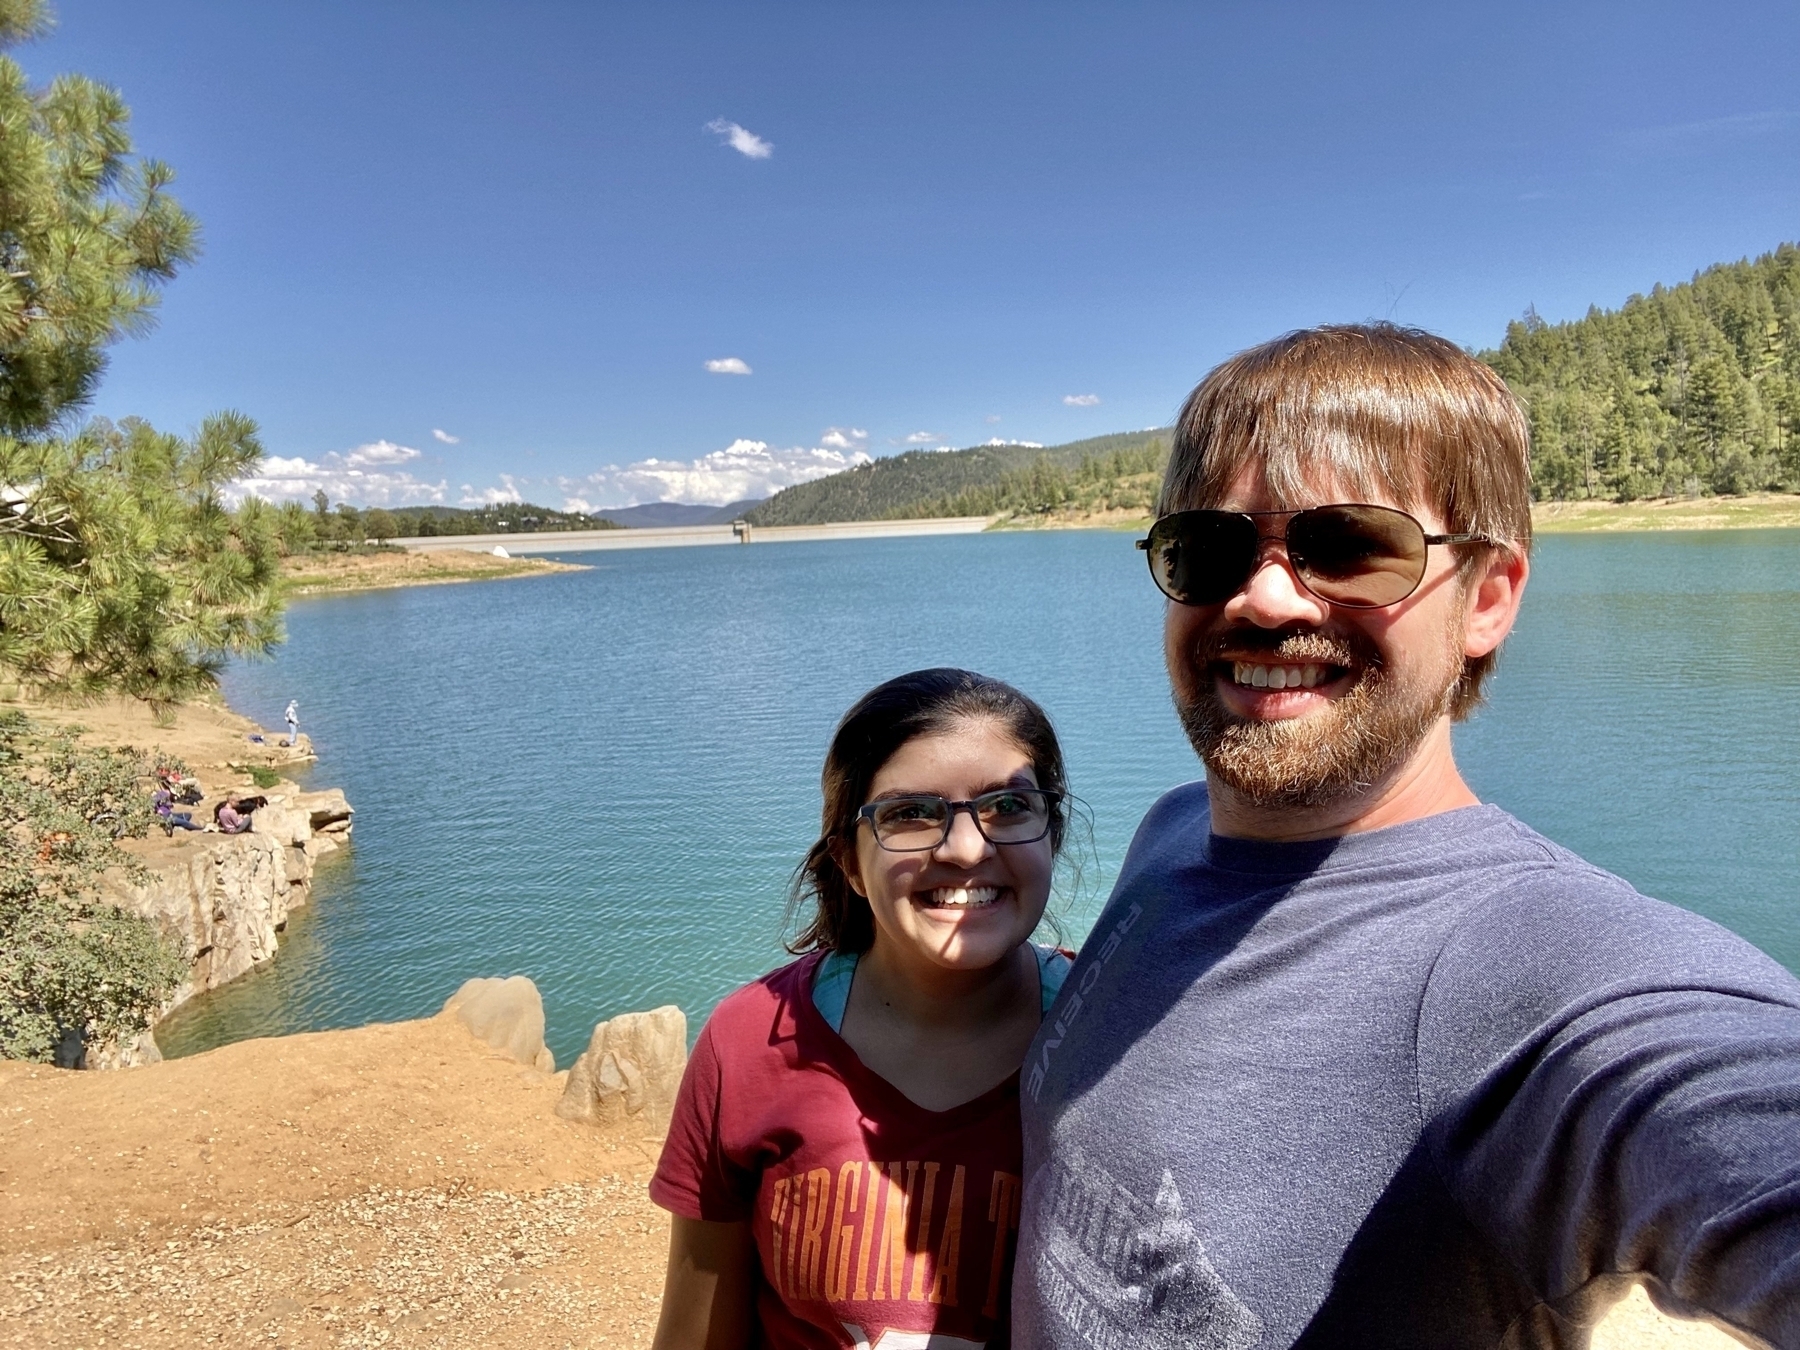 Selfie of my wife and me in front of Grindstone Lake on a very sunny day.